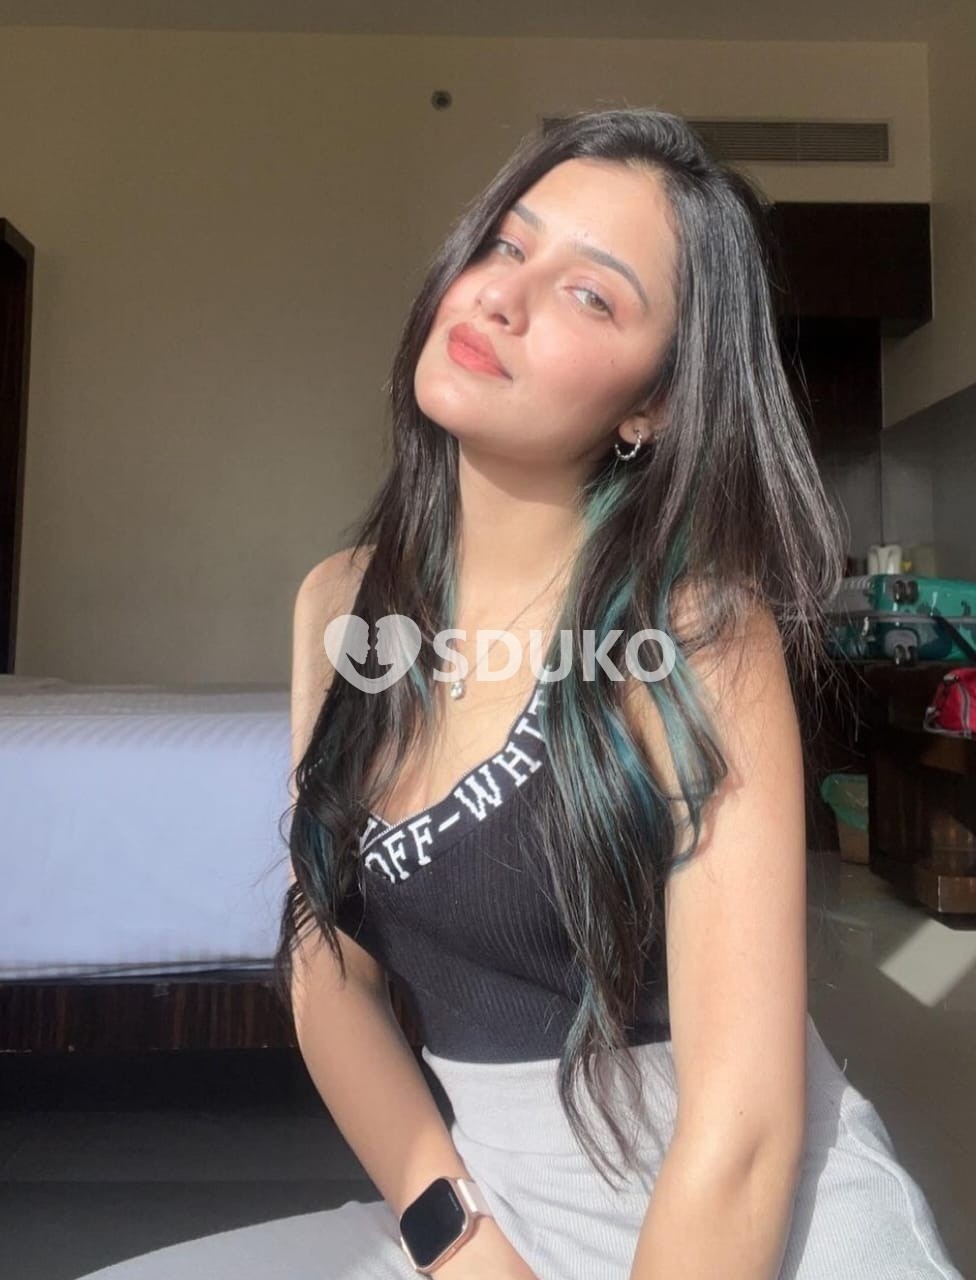 Andheri ✅ (24x7 AFFORDABLE CHEAPEST RATE SAFE CALL GIRL SERVICE AVAILABLE OUTCALL AVAILABLE..